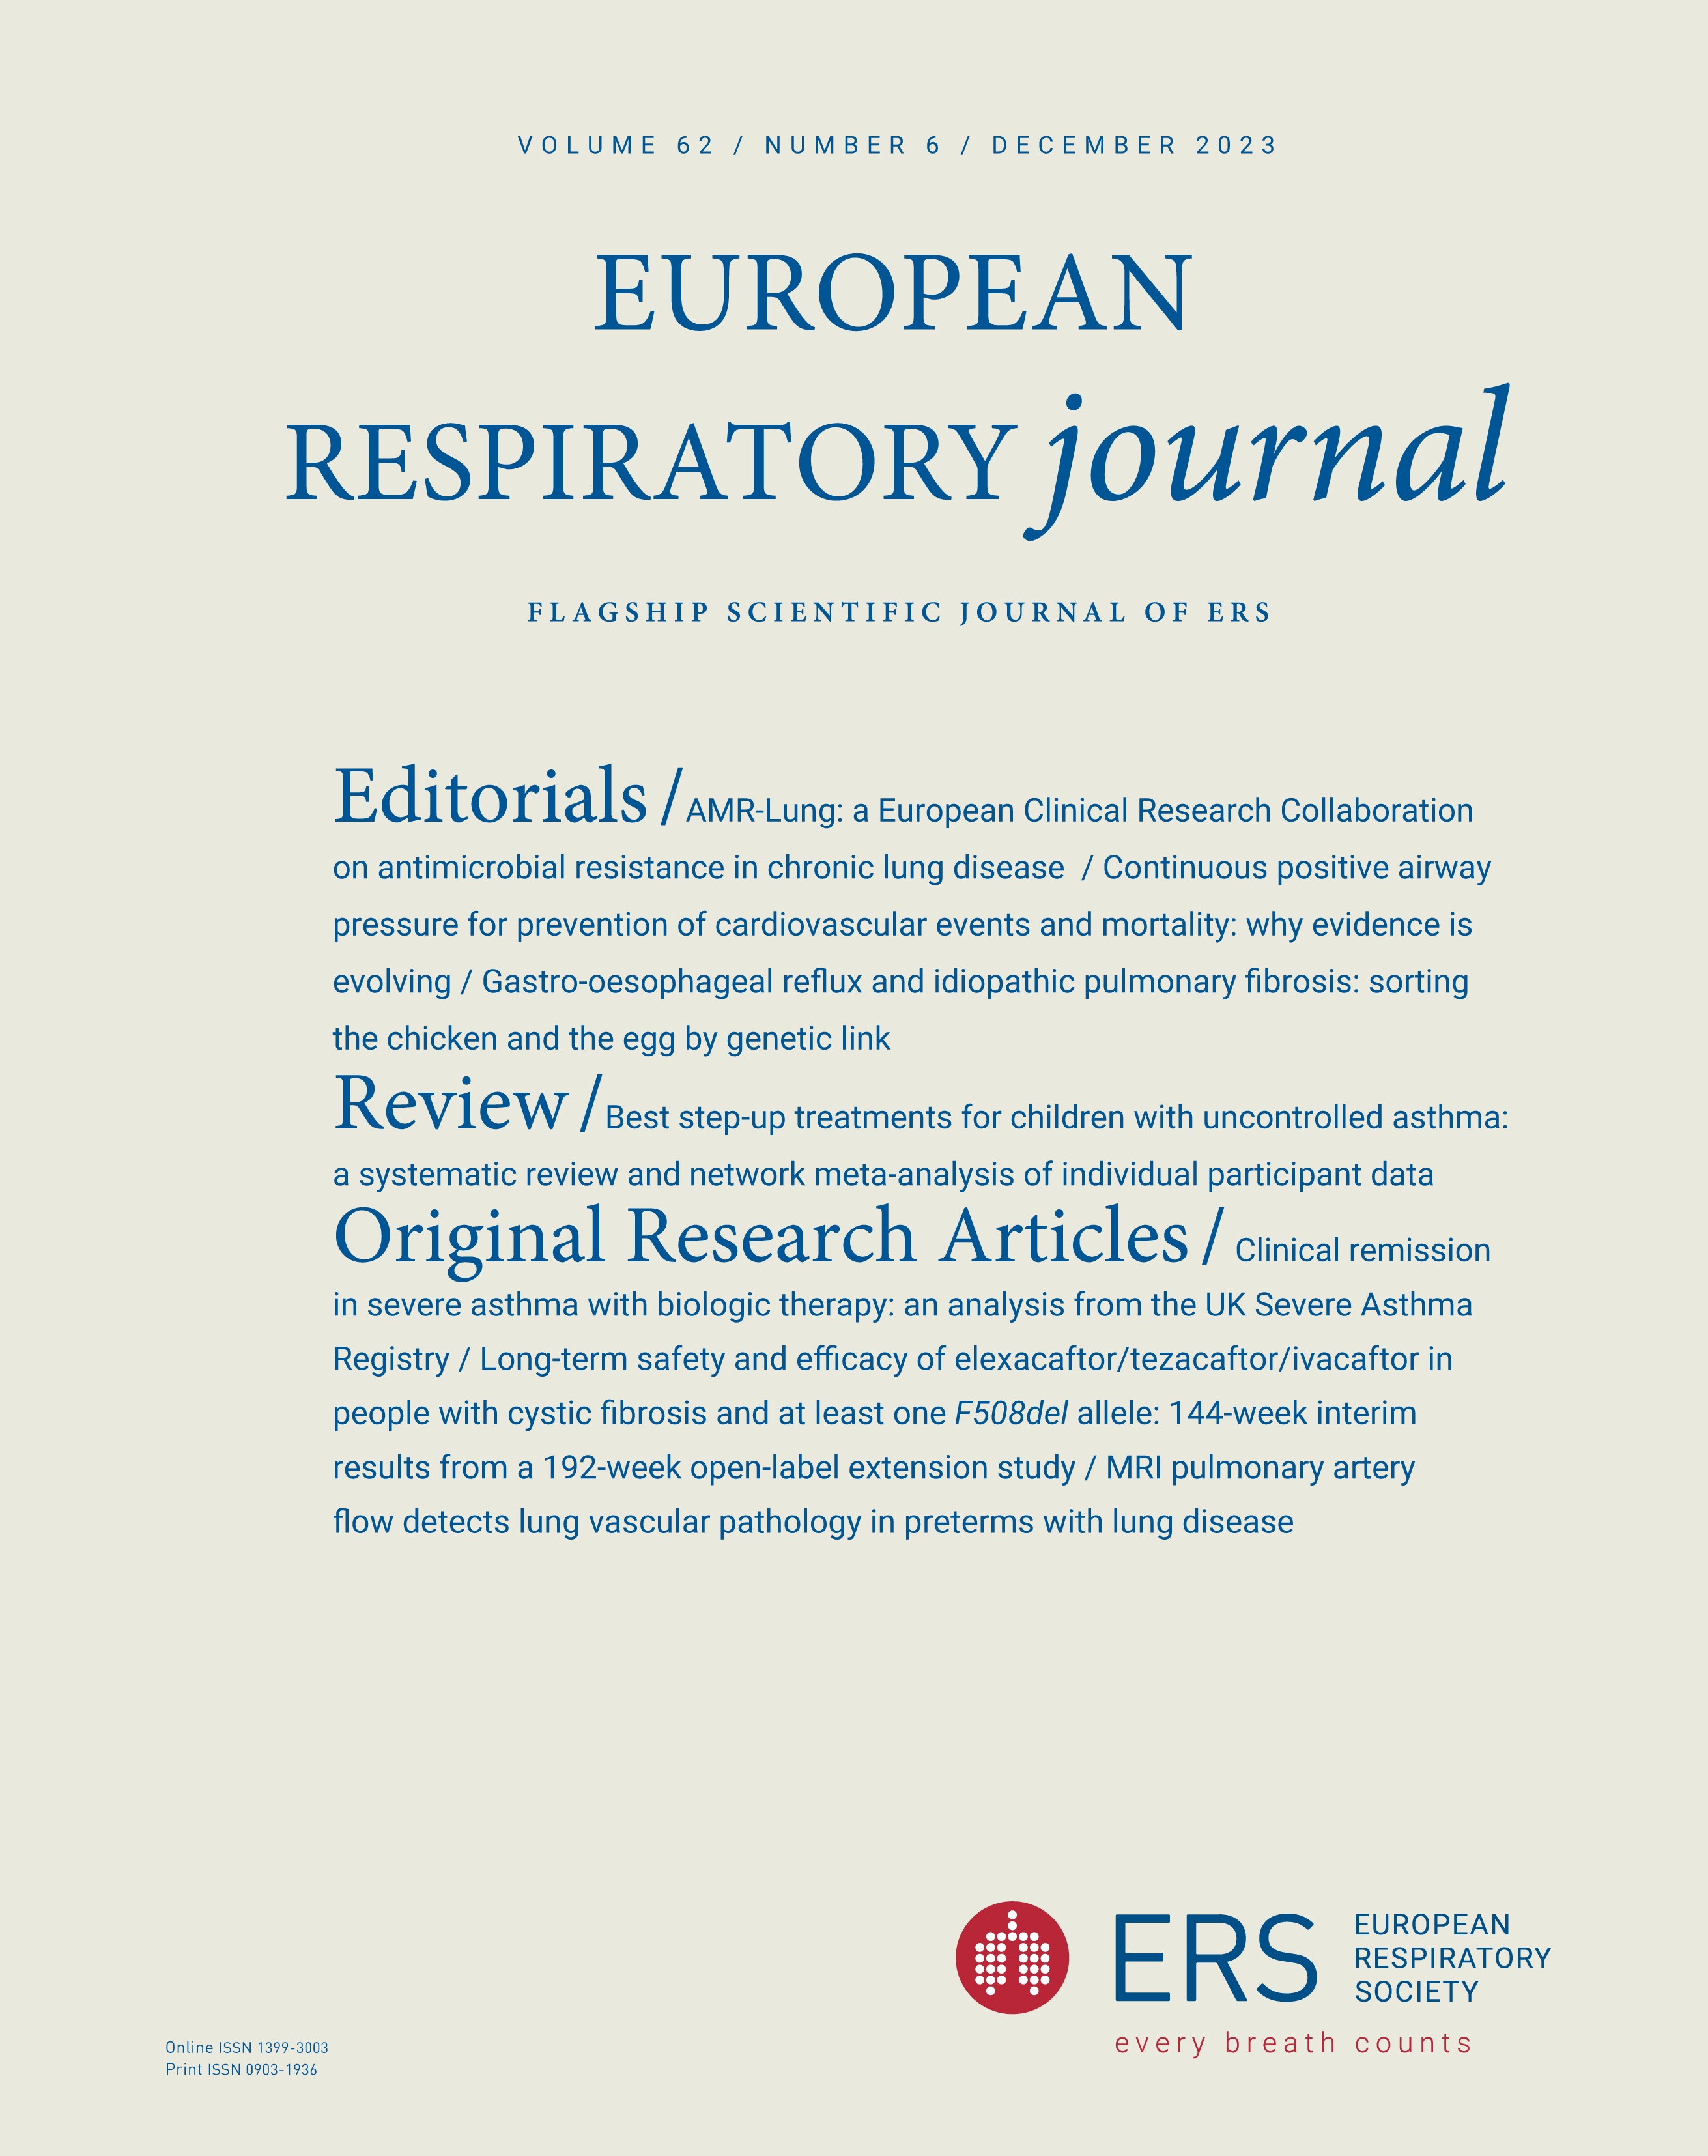 Reply to: ERS/ATS spirometry interpretation standards: a gap in grading severity of airflow obstruction